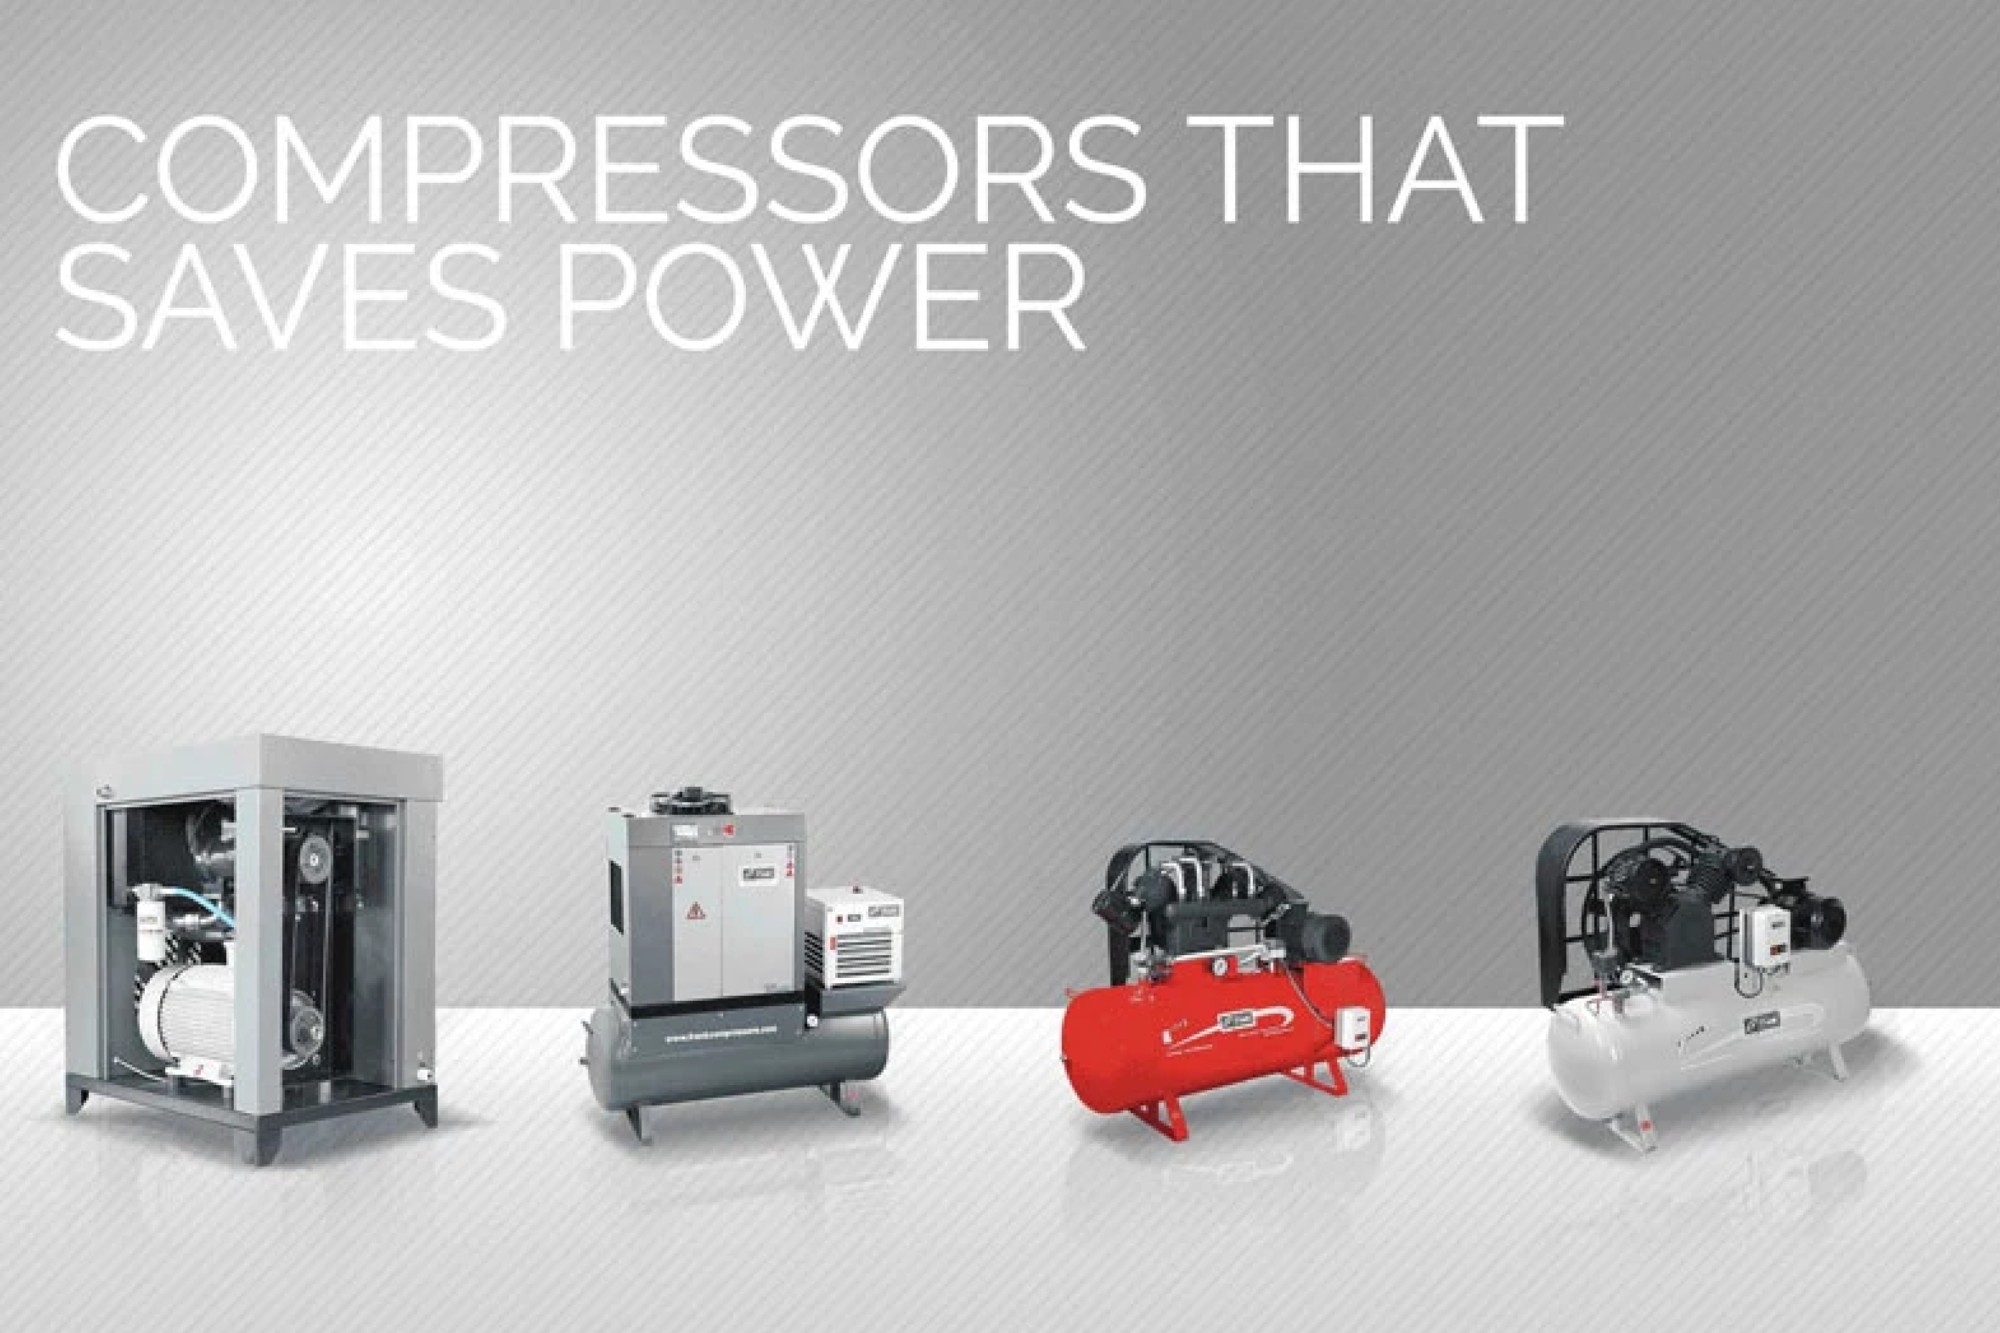 “Frank Technologies Pvt Ltd”- Air Compressors setting industry standards for compressed air solutions